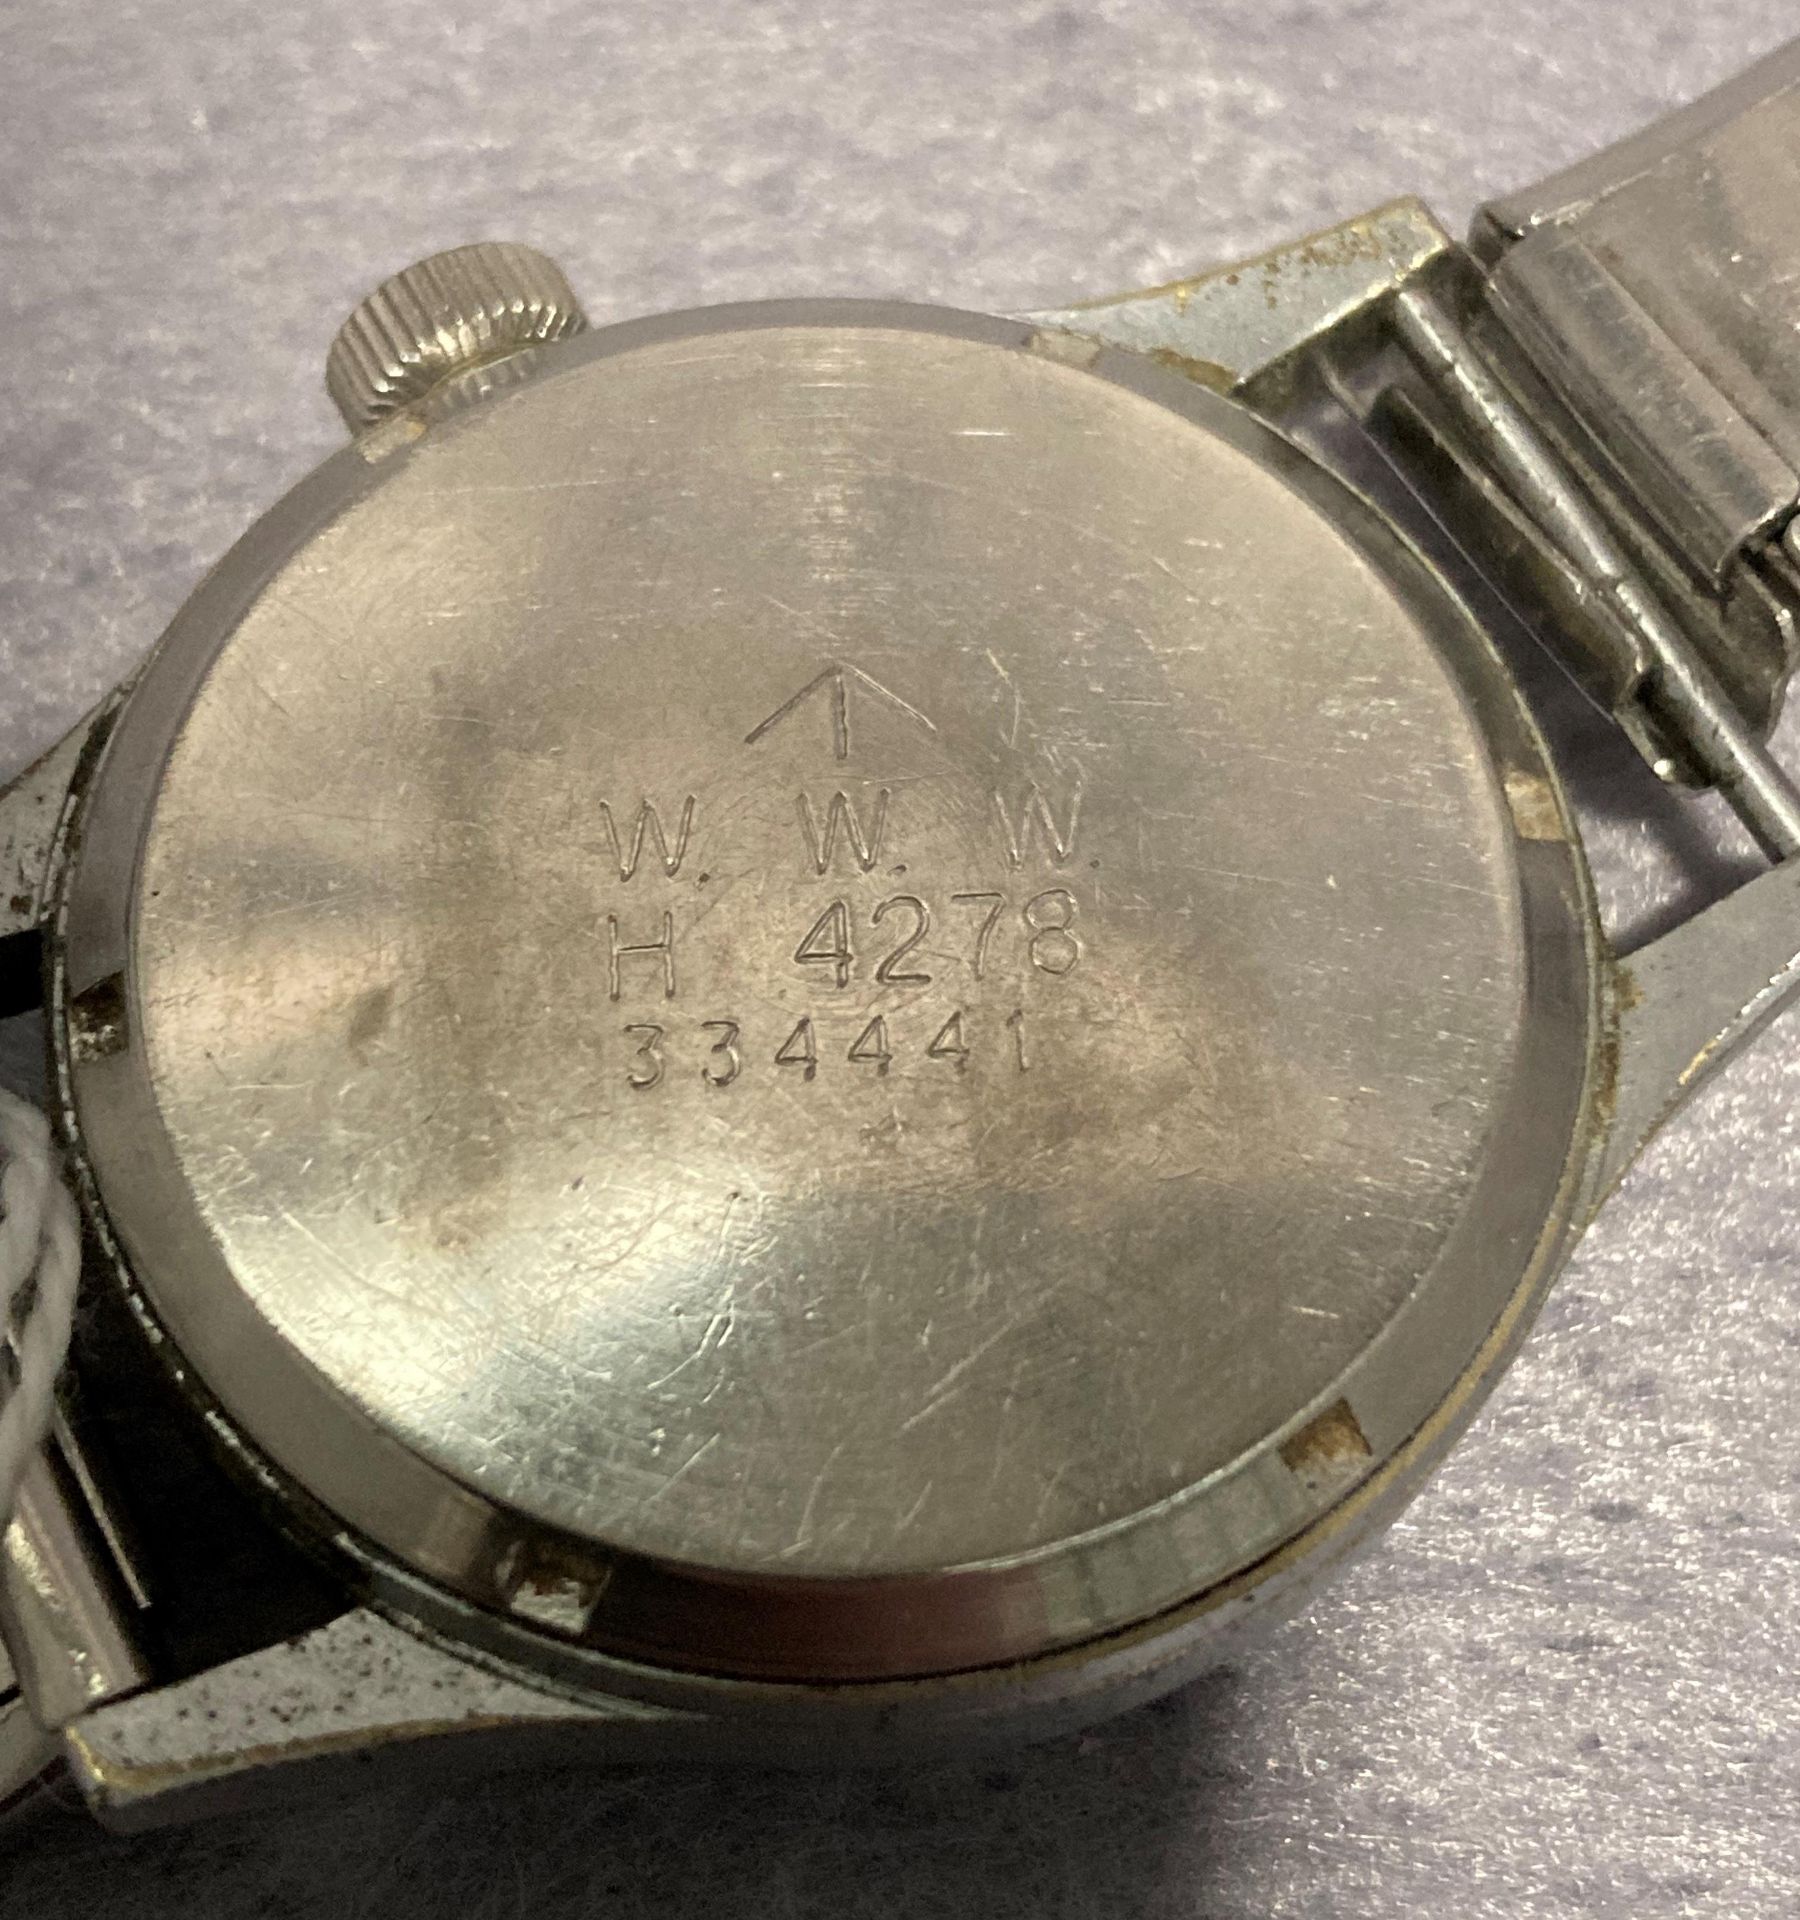 Military issue 'Buren - Grand Prix' WWW Dirty Dozen British Army watch with marking to back, - Image 4 of 9